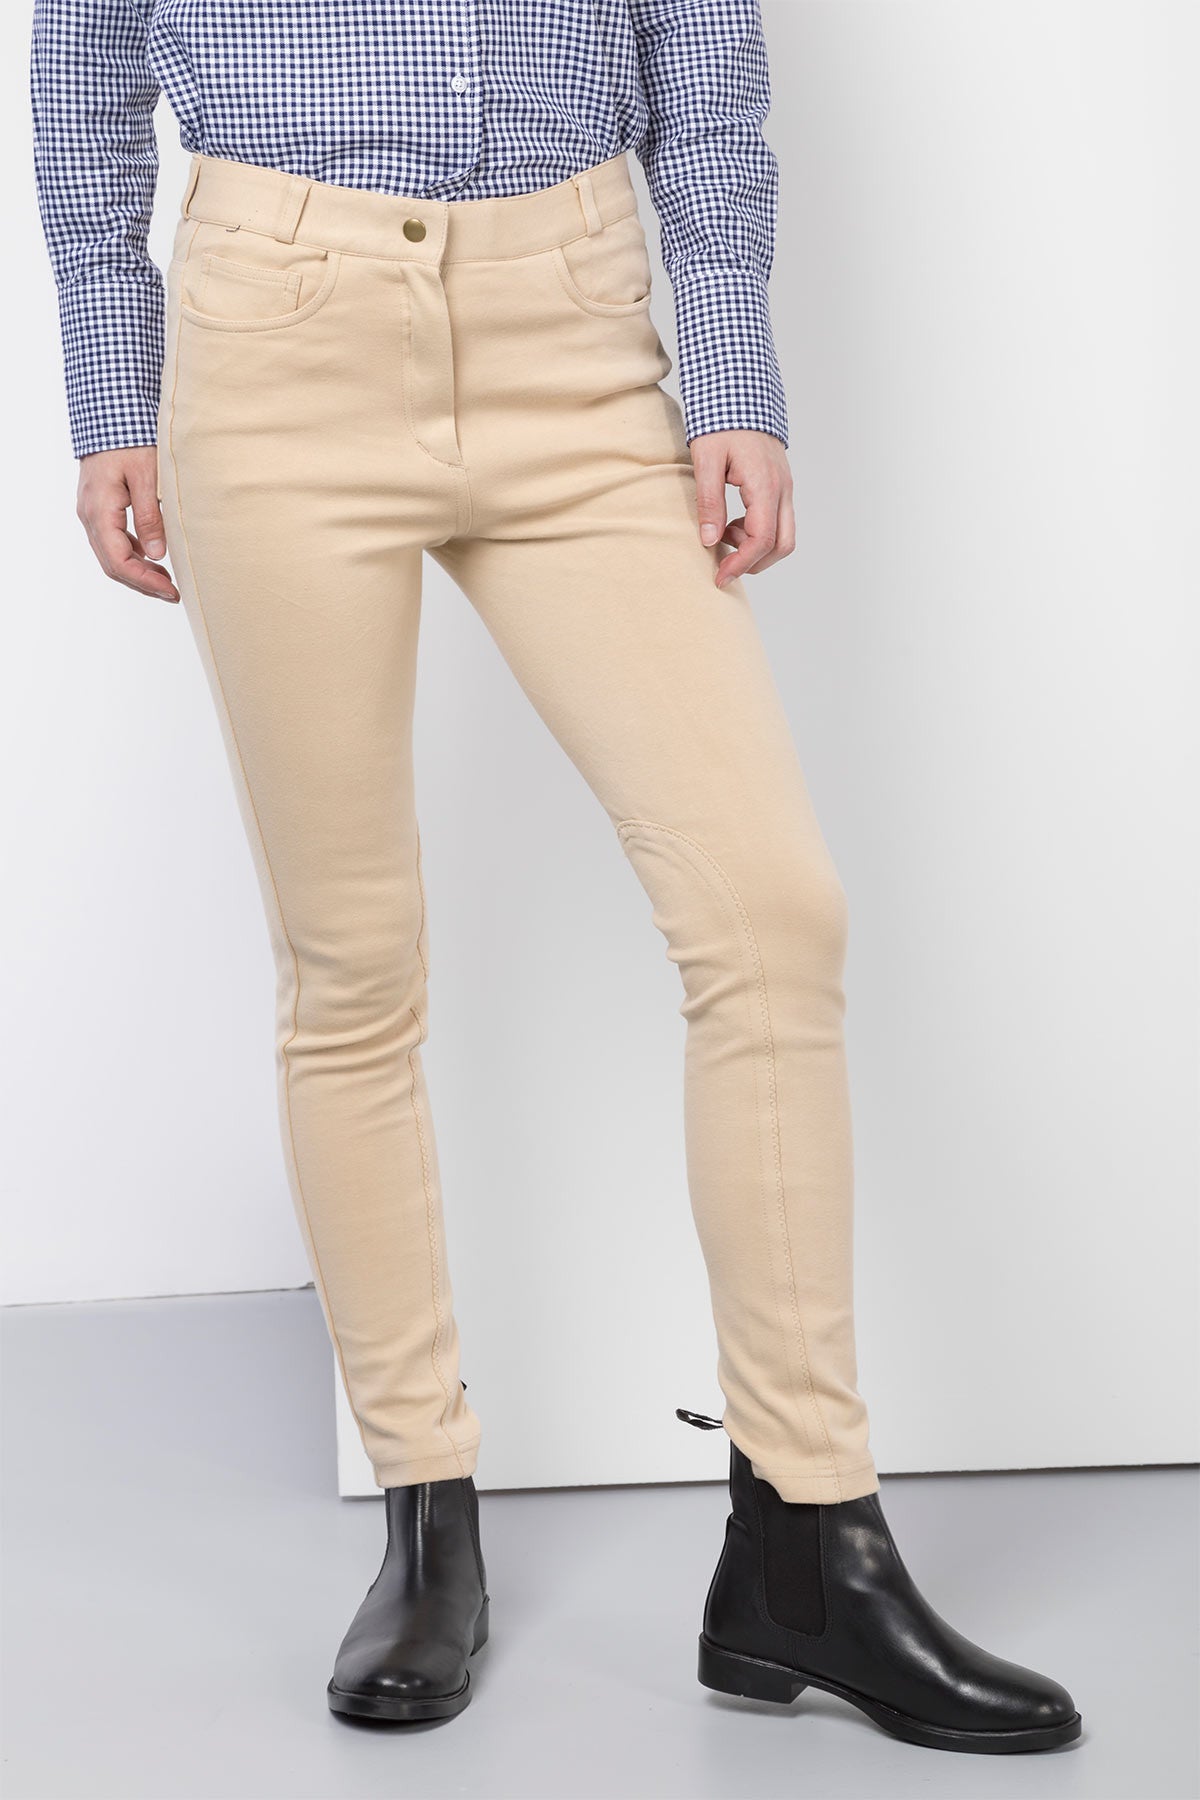 Cotton Mens Formal Trousers Style Type  Slim Fit Gender  Male at Rs 300   Piece in Jodhpur